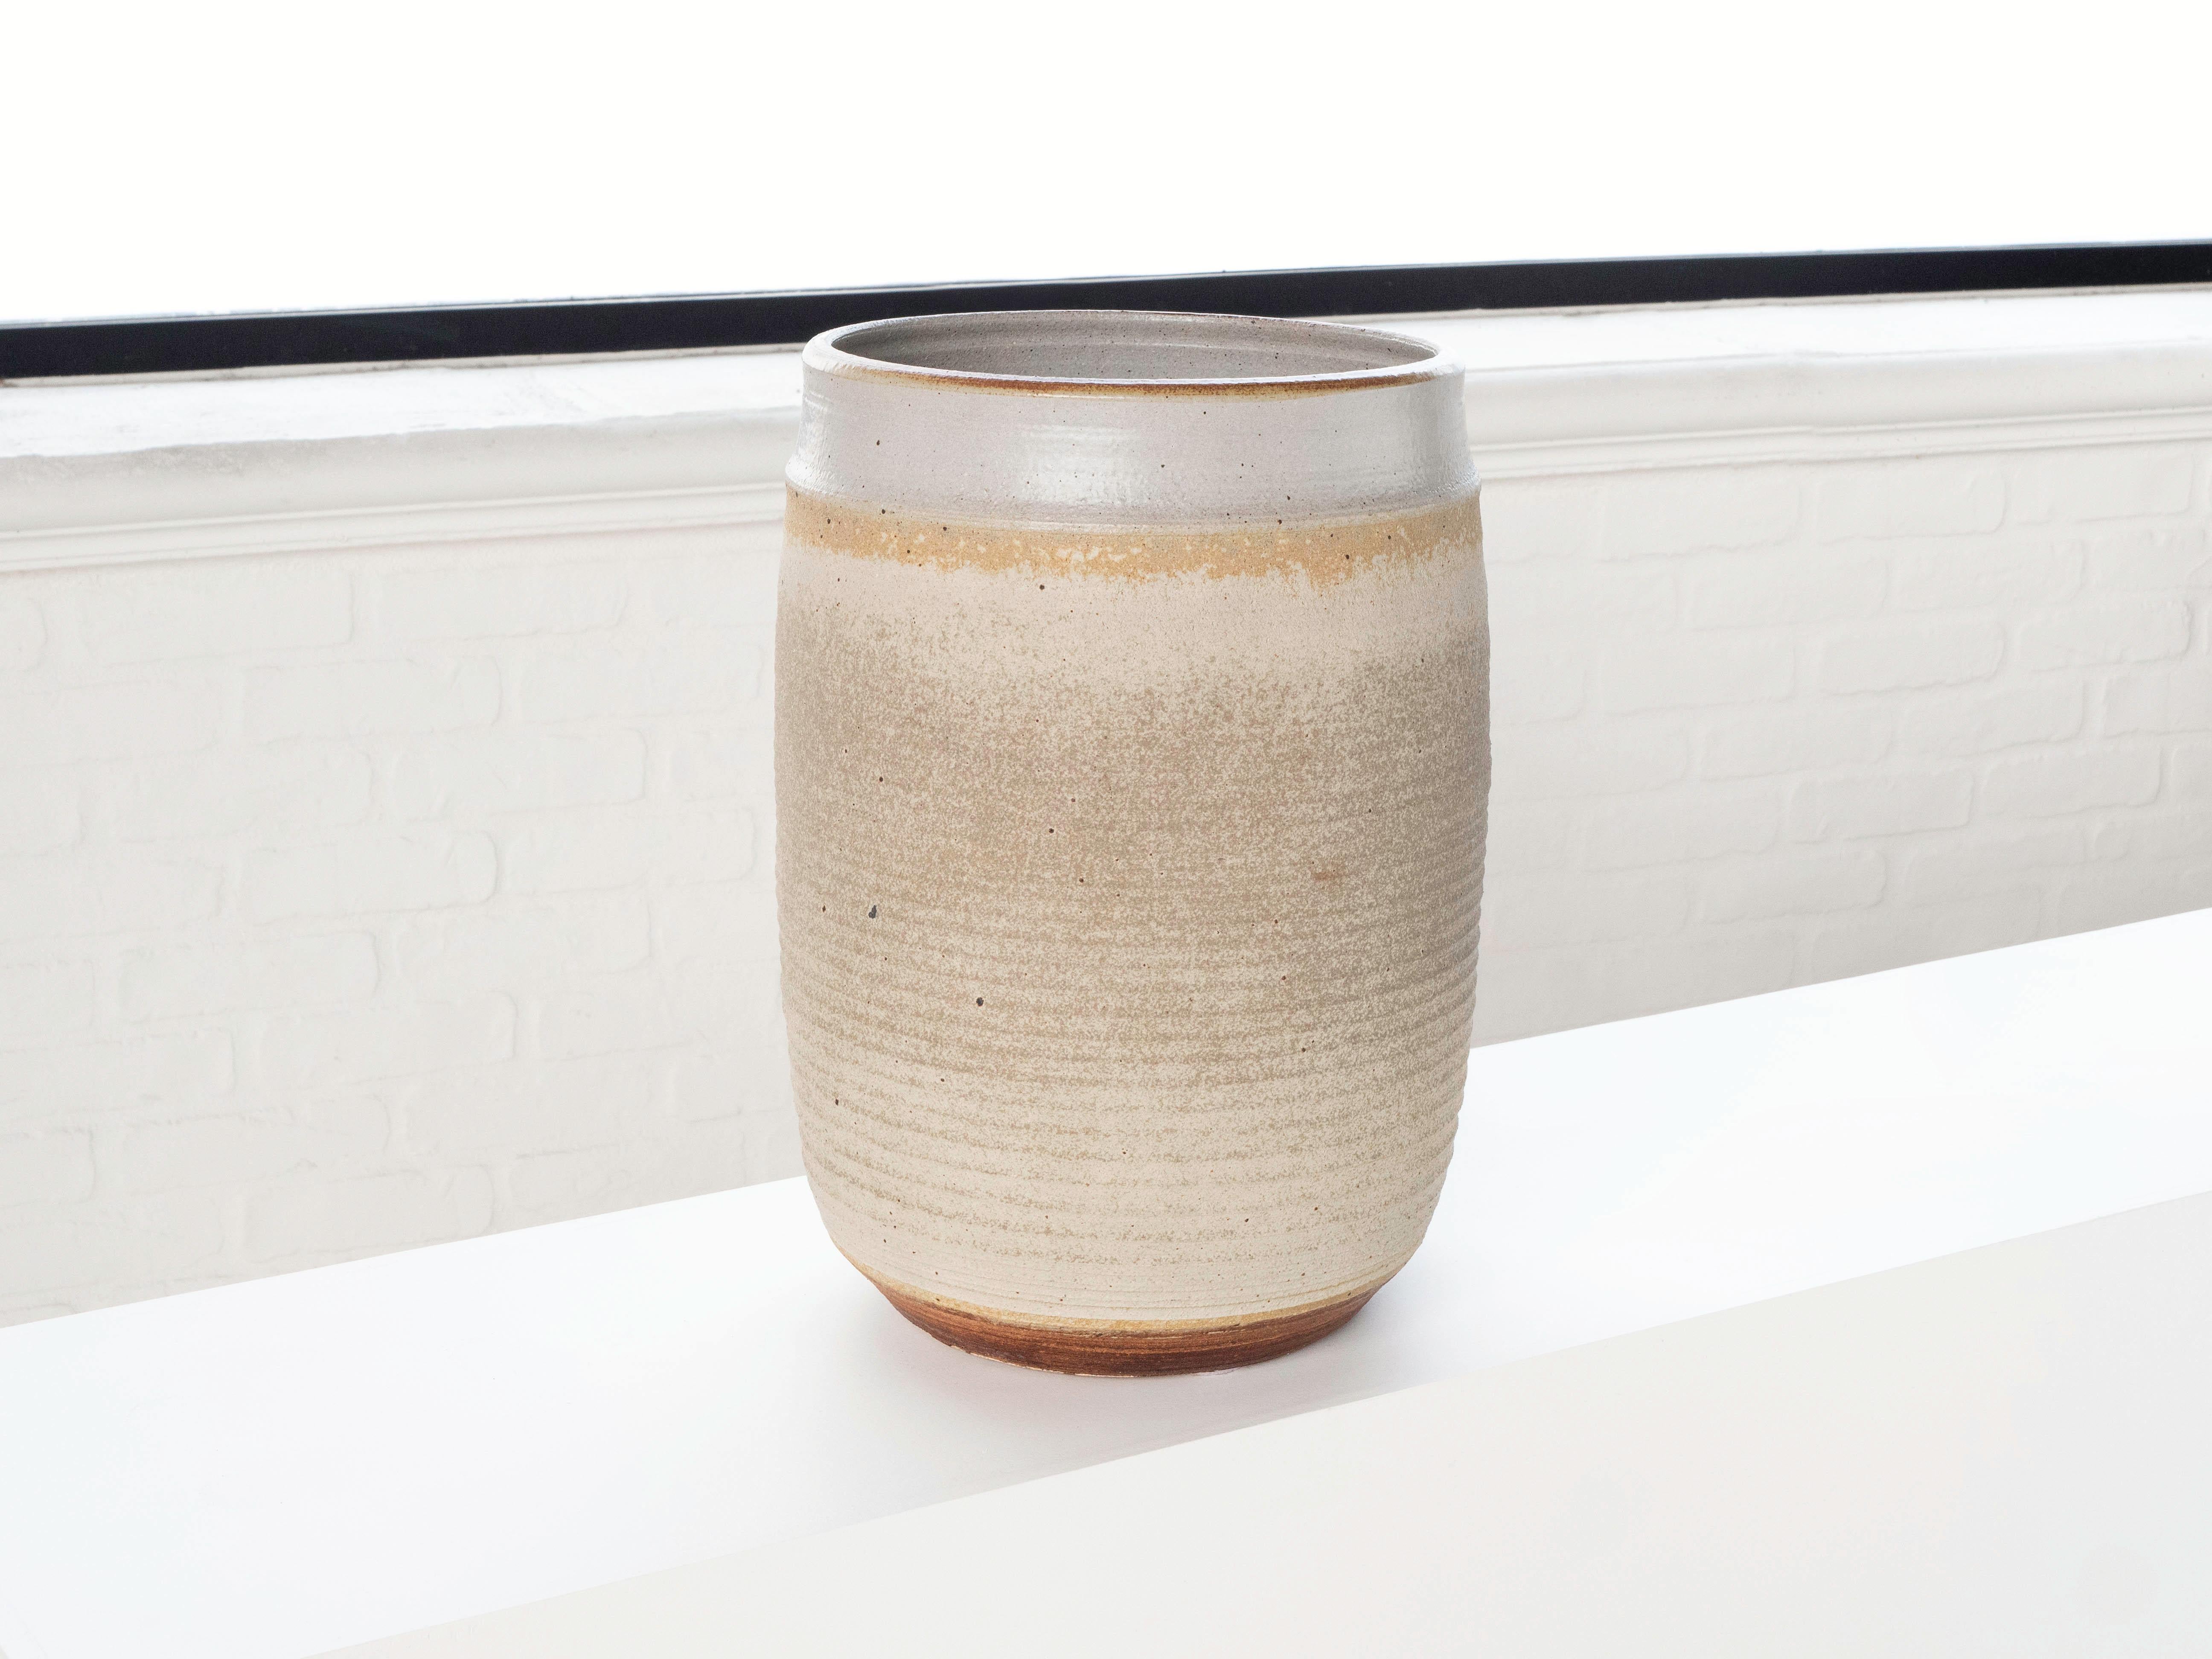 A large hand thrown cylindrical shaped planter by ceramist Bob Kinzie for his company Affiliated Craftsmen, California 1960s. The upper portion of the piece has a neutral tan tone glaze with espresso colored specks while the bottom portion shows